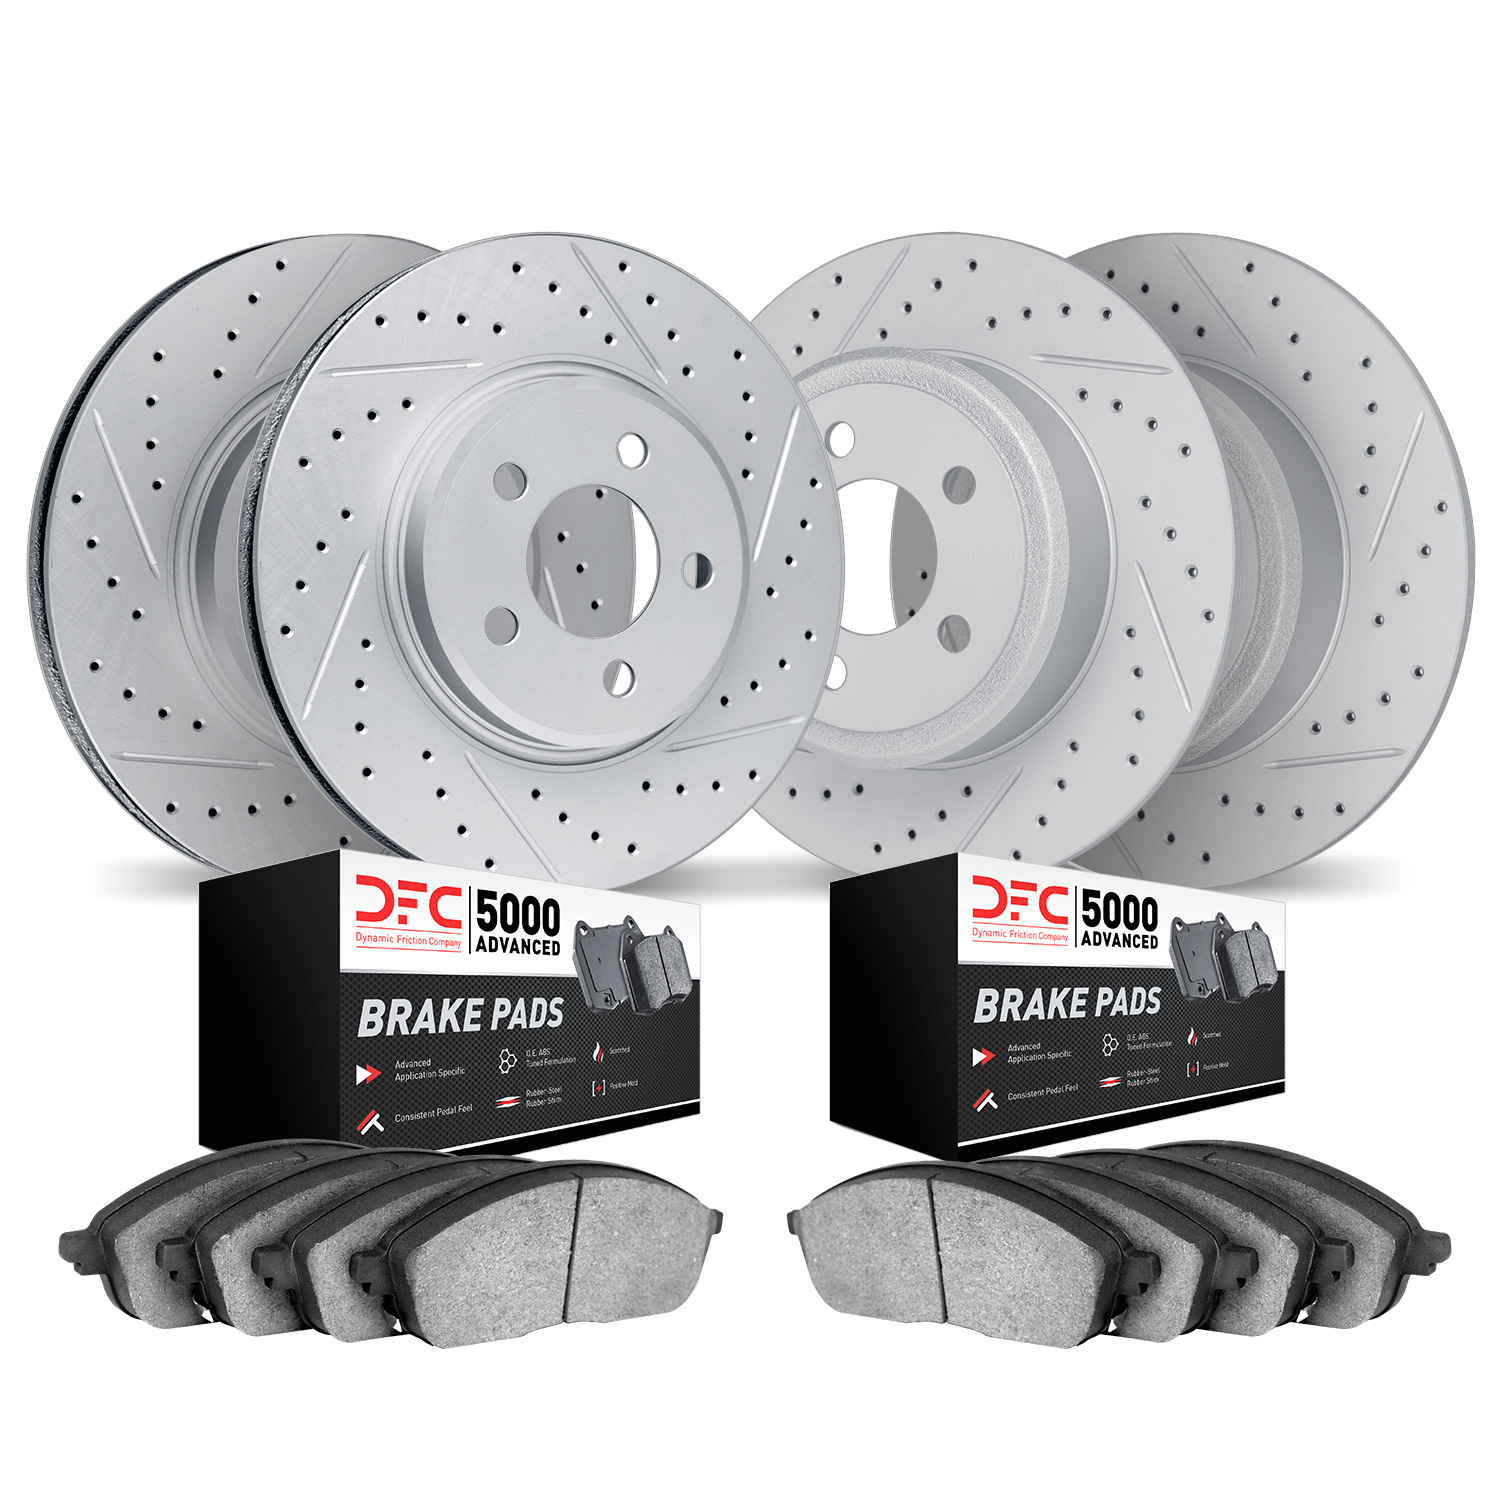 2504-42068 Geoperformance Drilled/Slotted Rotors w/5000 Advanced Brake Pads Kit, 2011-2012 Mopar, Position: Front and Rear